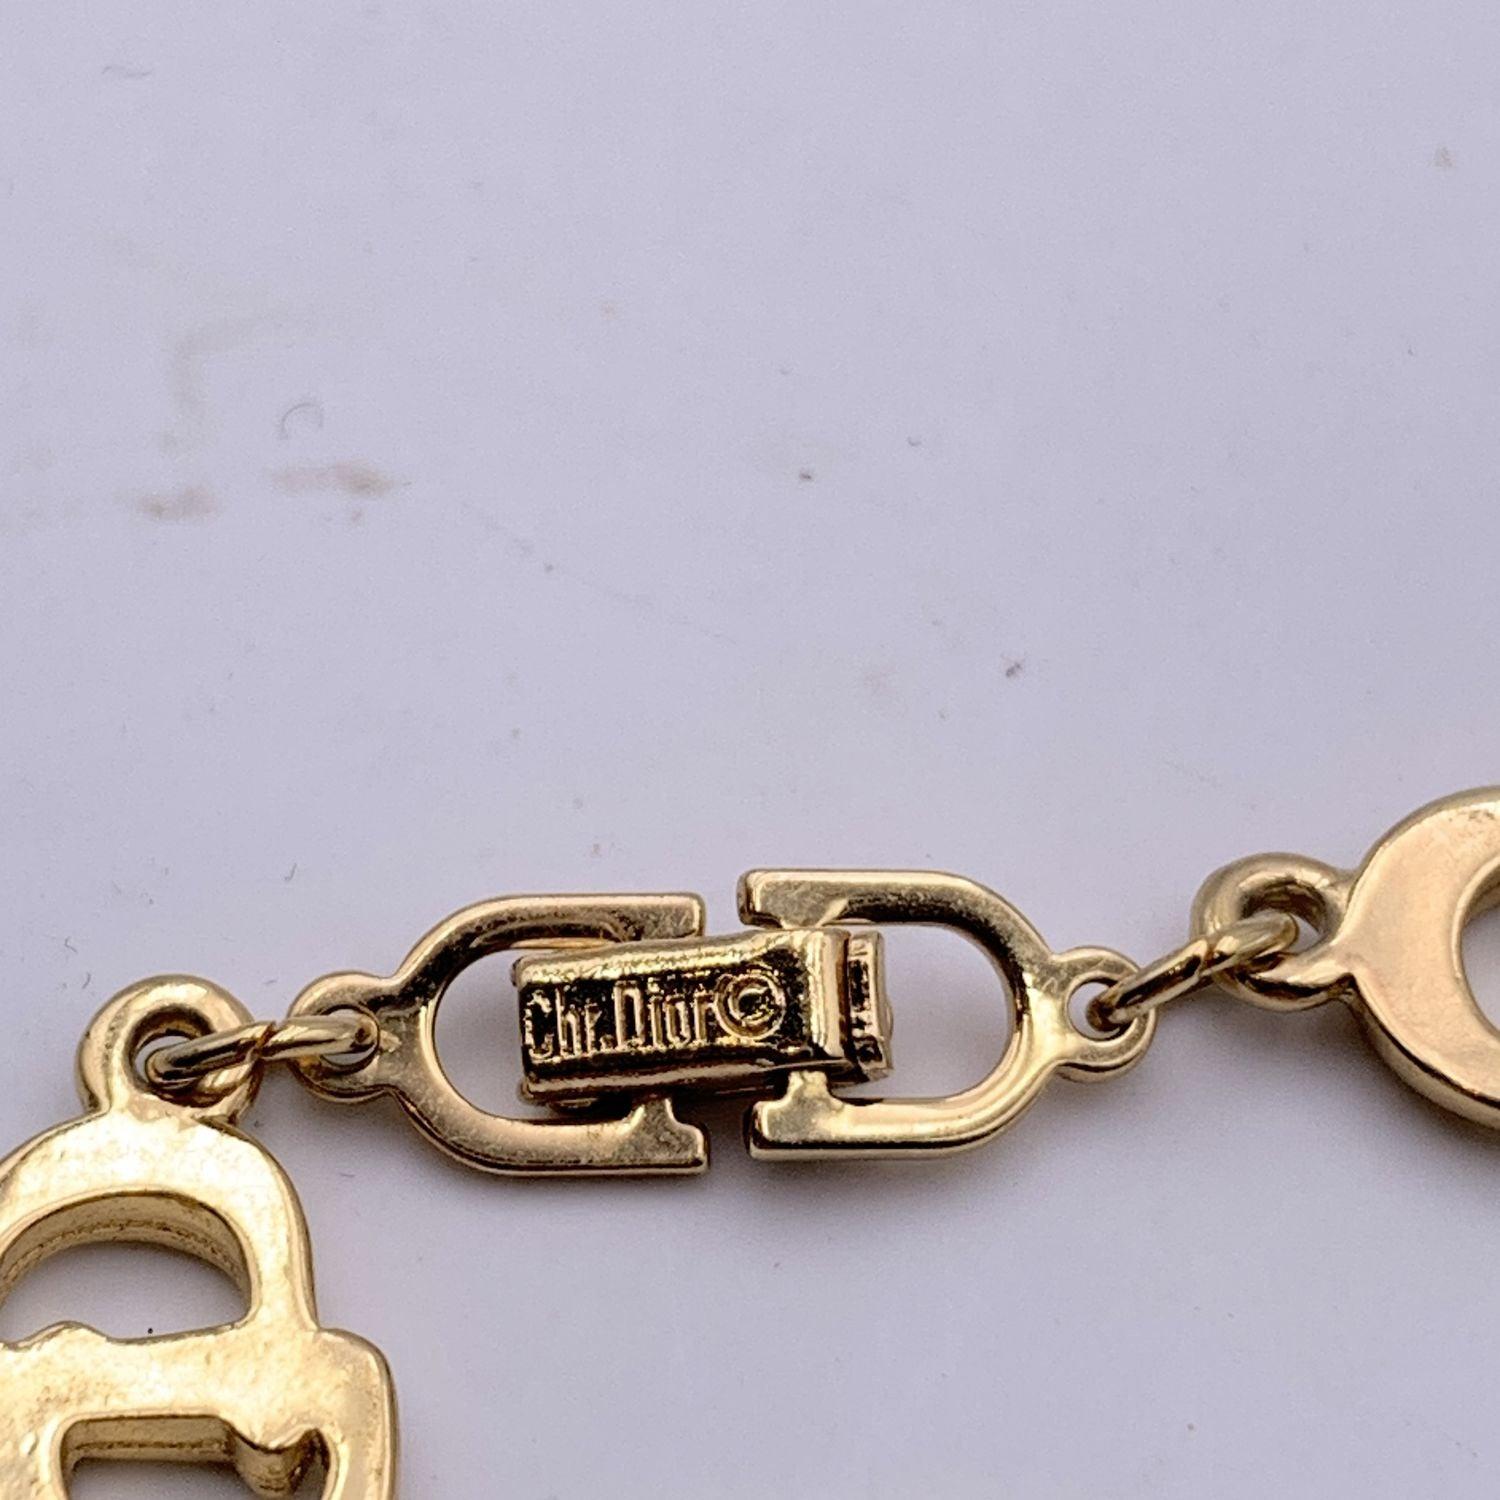 Vintage gold metal chain bracelet by CHRISTIAN DIOR. CD logo chain links. Clasp closure. Total length: 7 inches - 17.8 cm. 'Chr. Dior' engraved on the closure. Condition A - EXCELLENT Gently used. Please check pictures carefully and ask for any